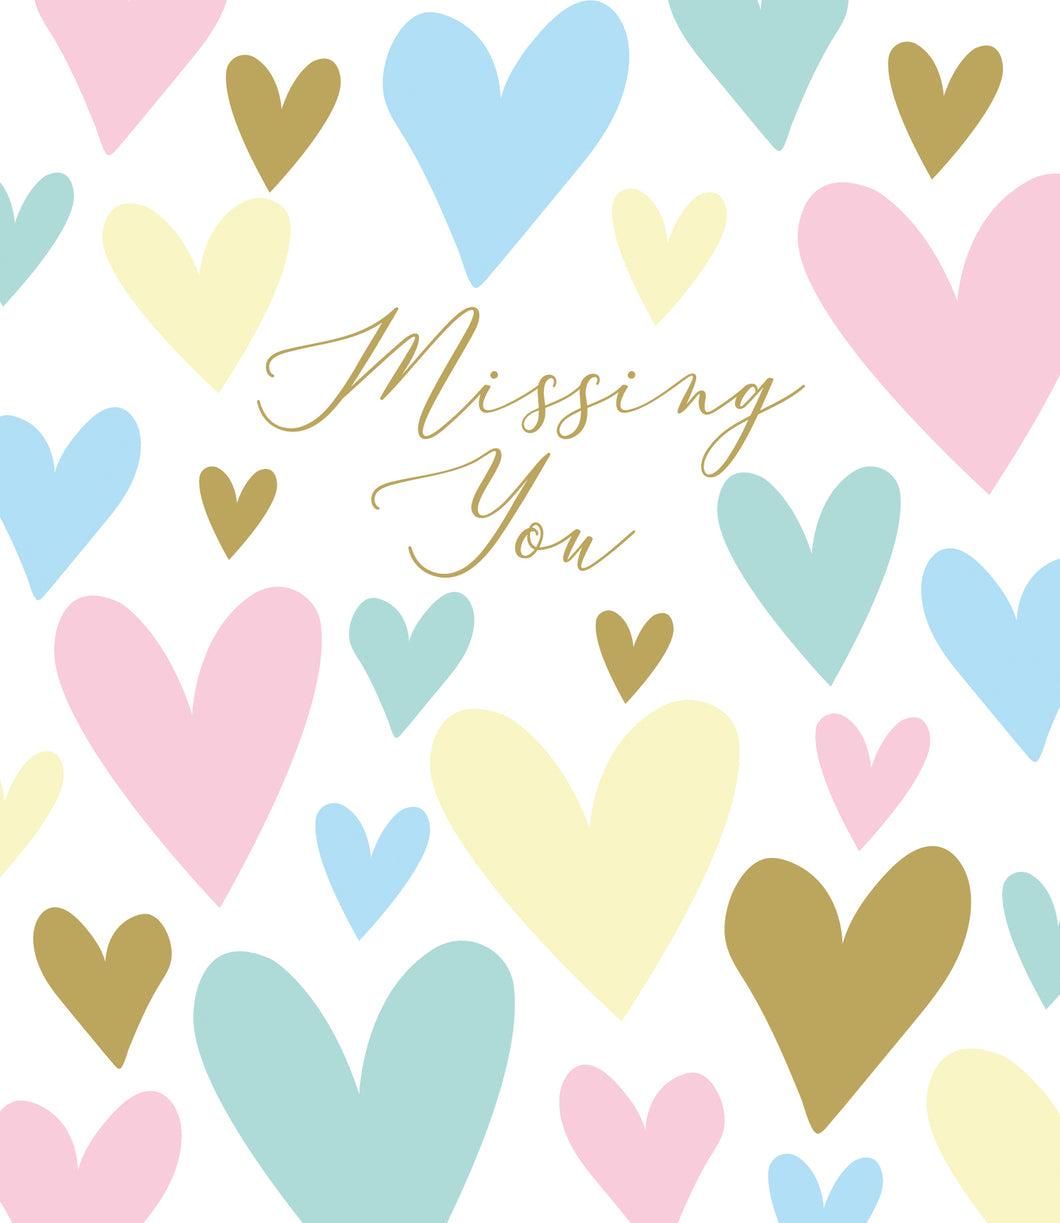 Missing You - Greeting Card